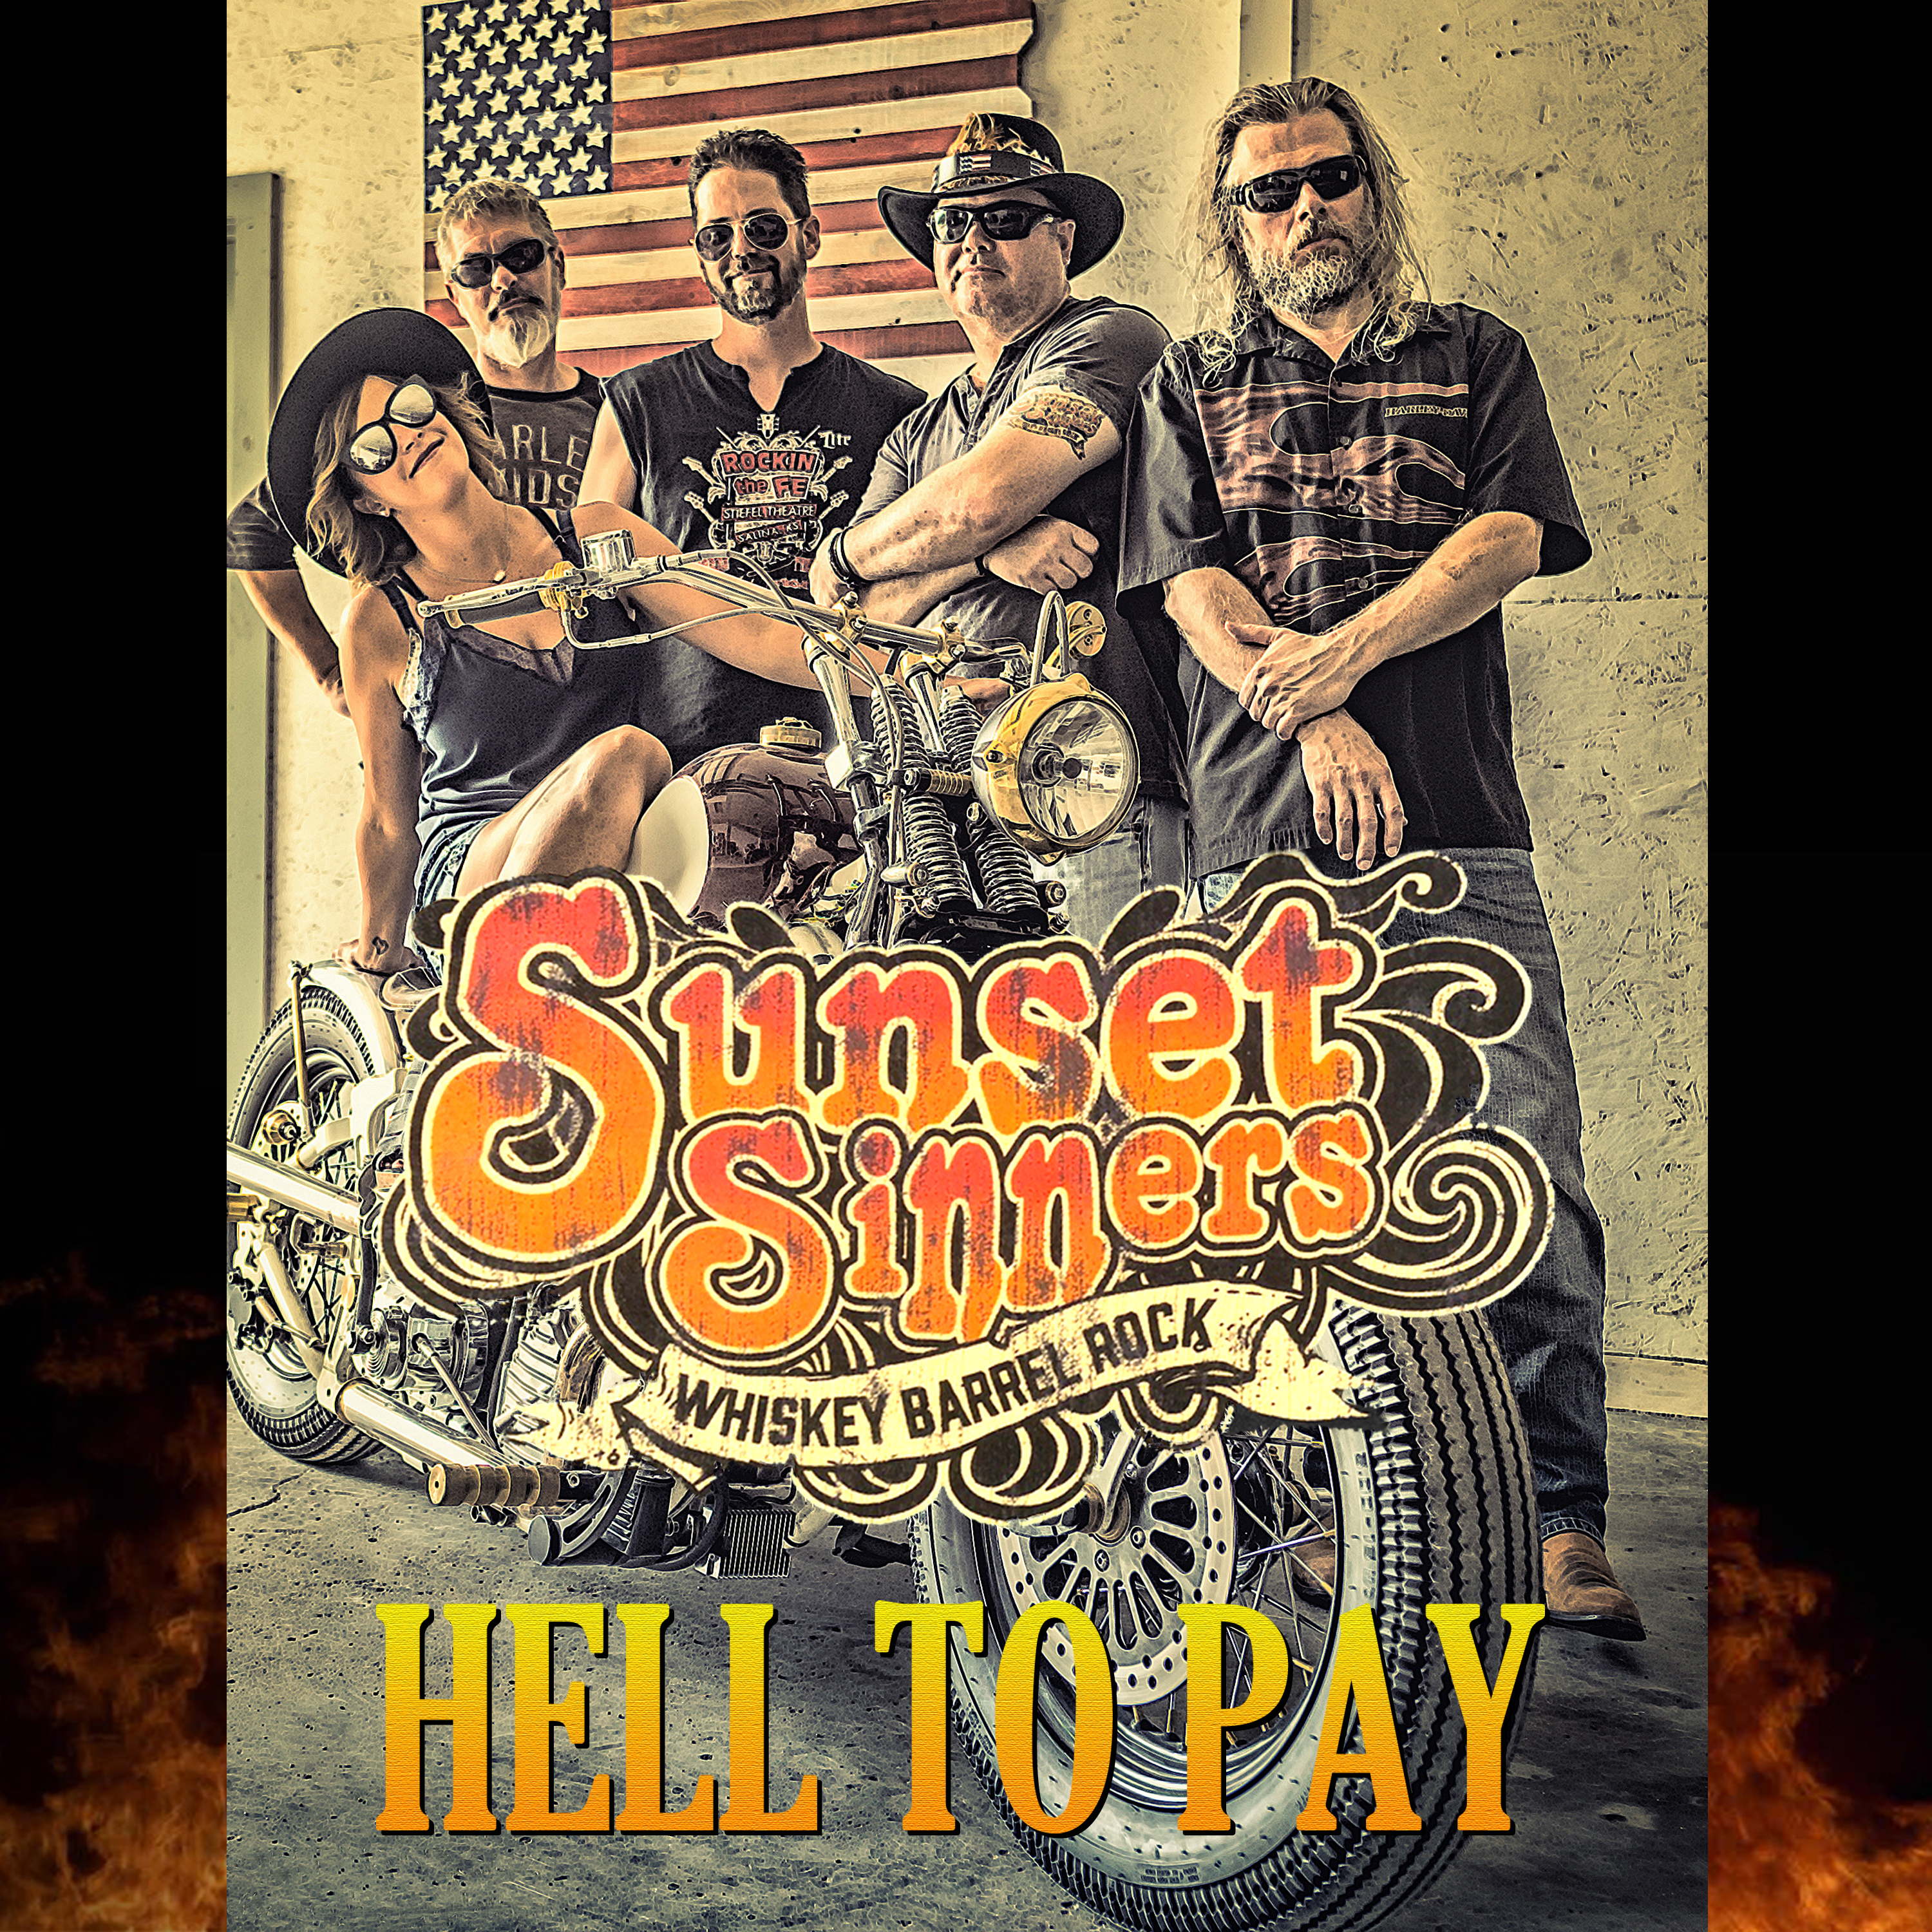 Art for Hell To Pay by Sunset Sinners